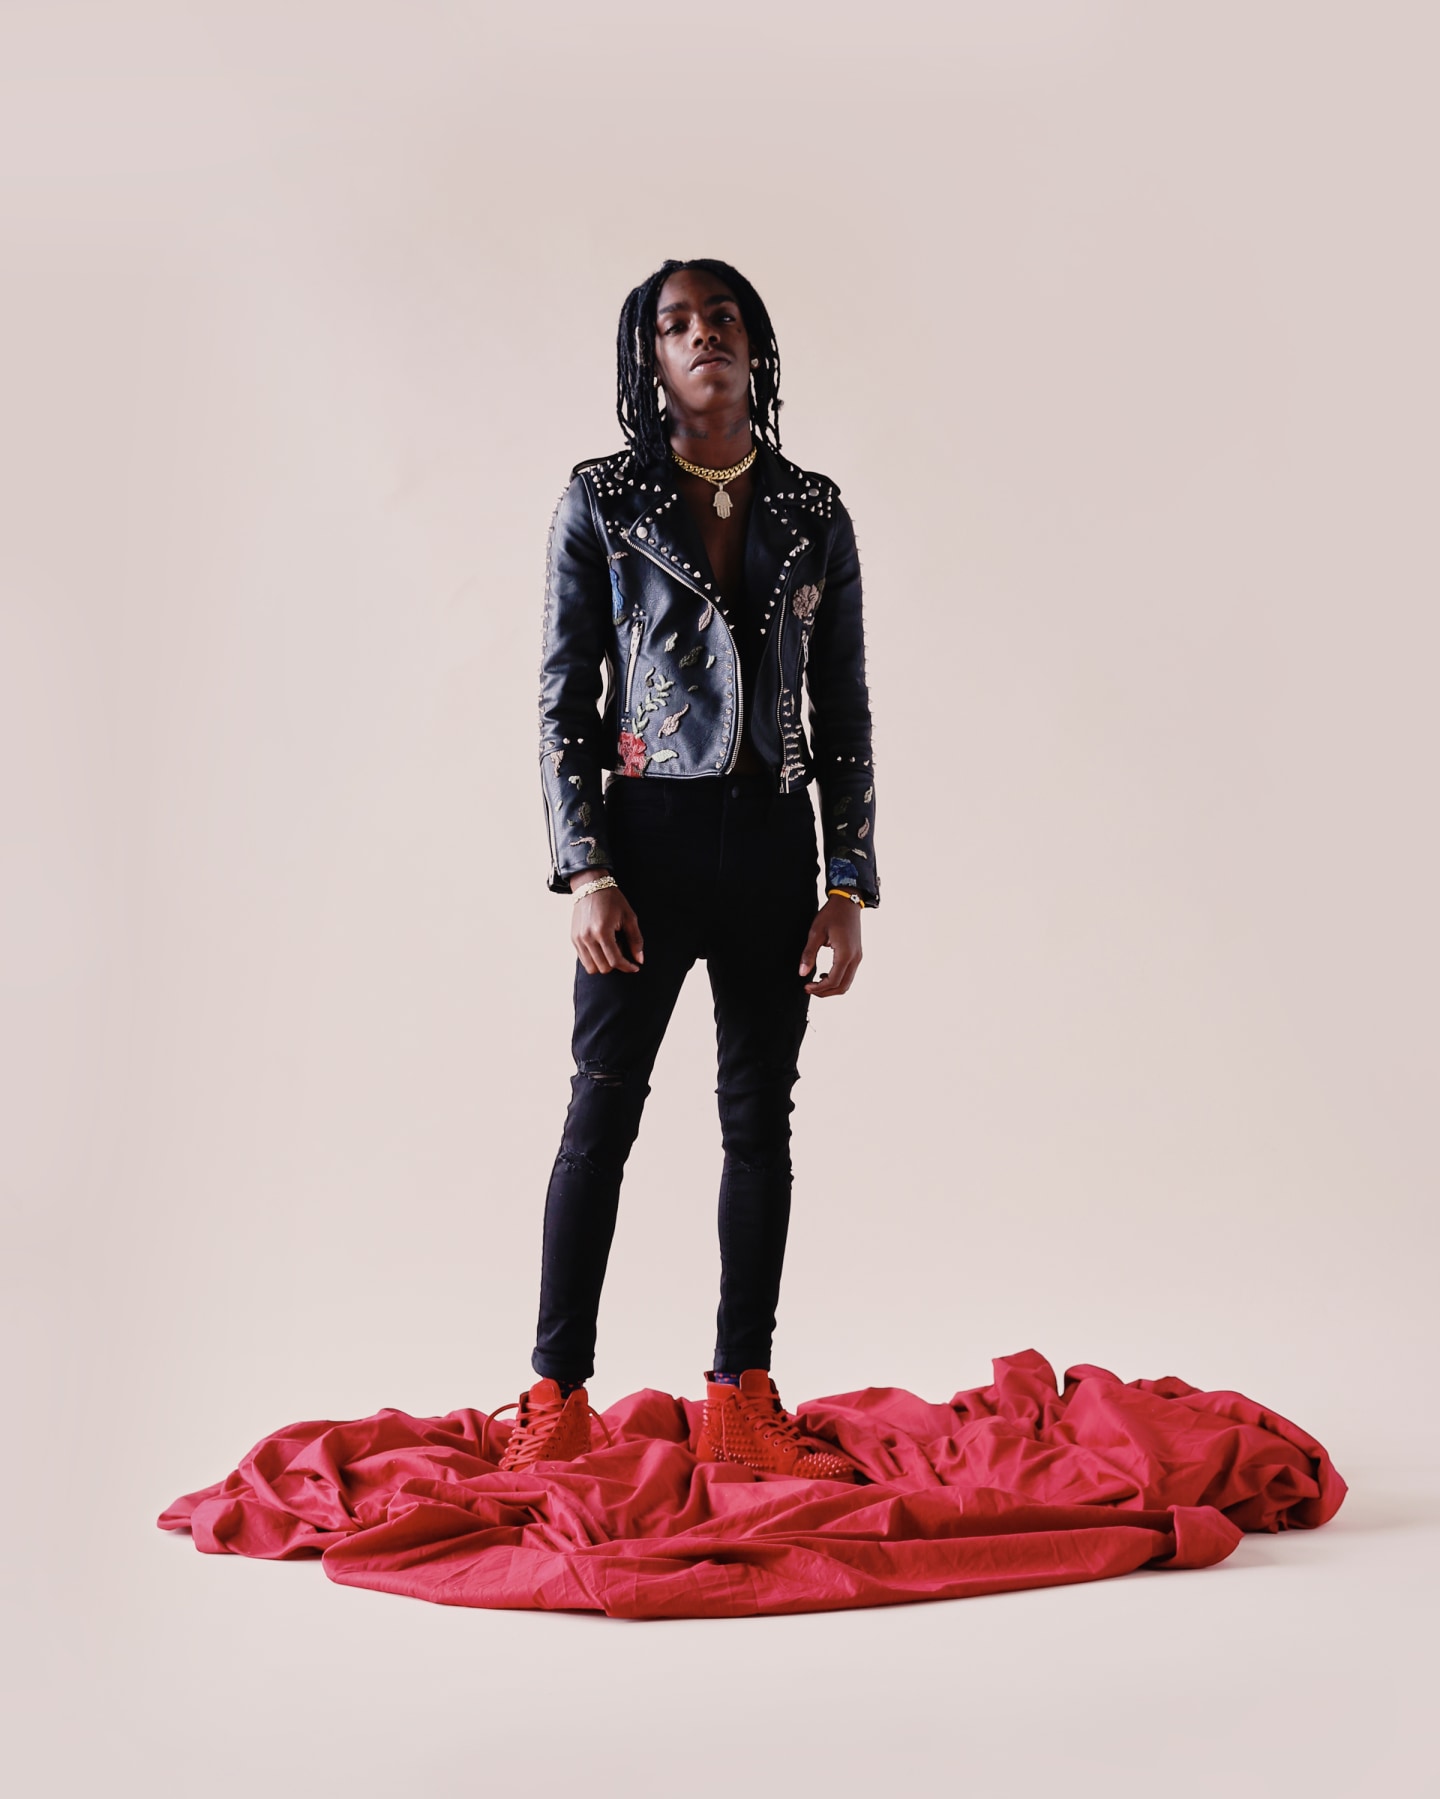 How YNW Melly turned his pain into beautiful rap ballads | The FADER